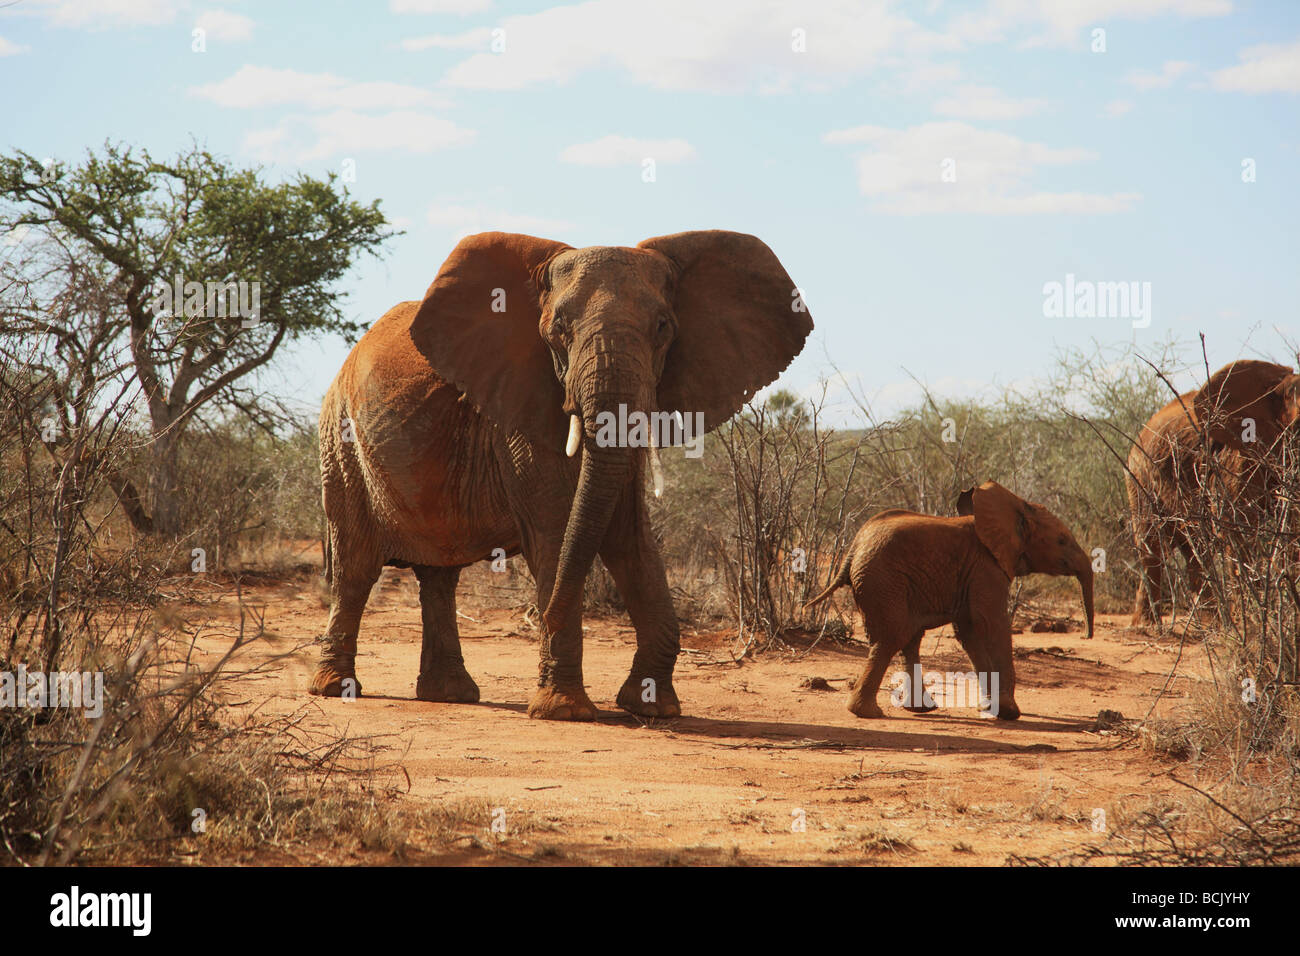 Elephants, mother and baby on the move in Laikipia region of  Kenya 2009 Stock Photo